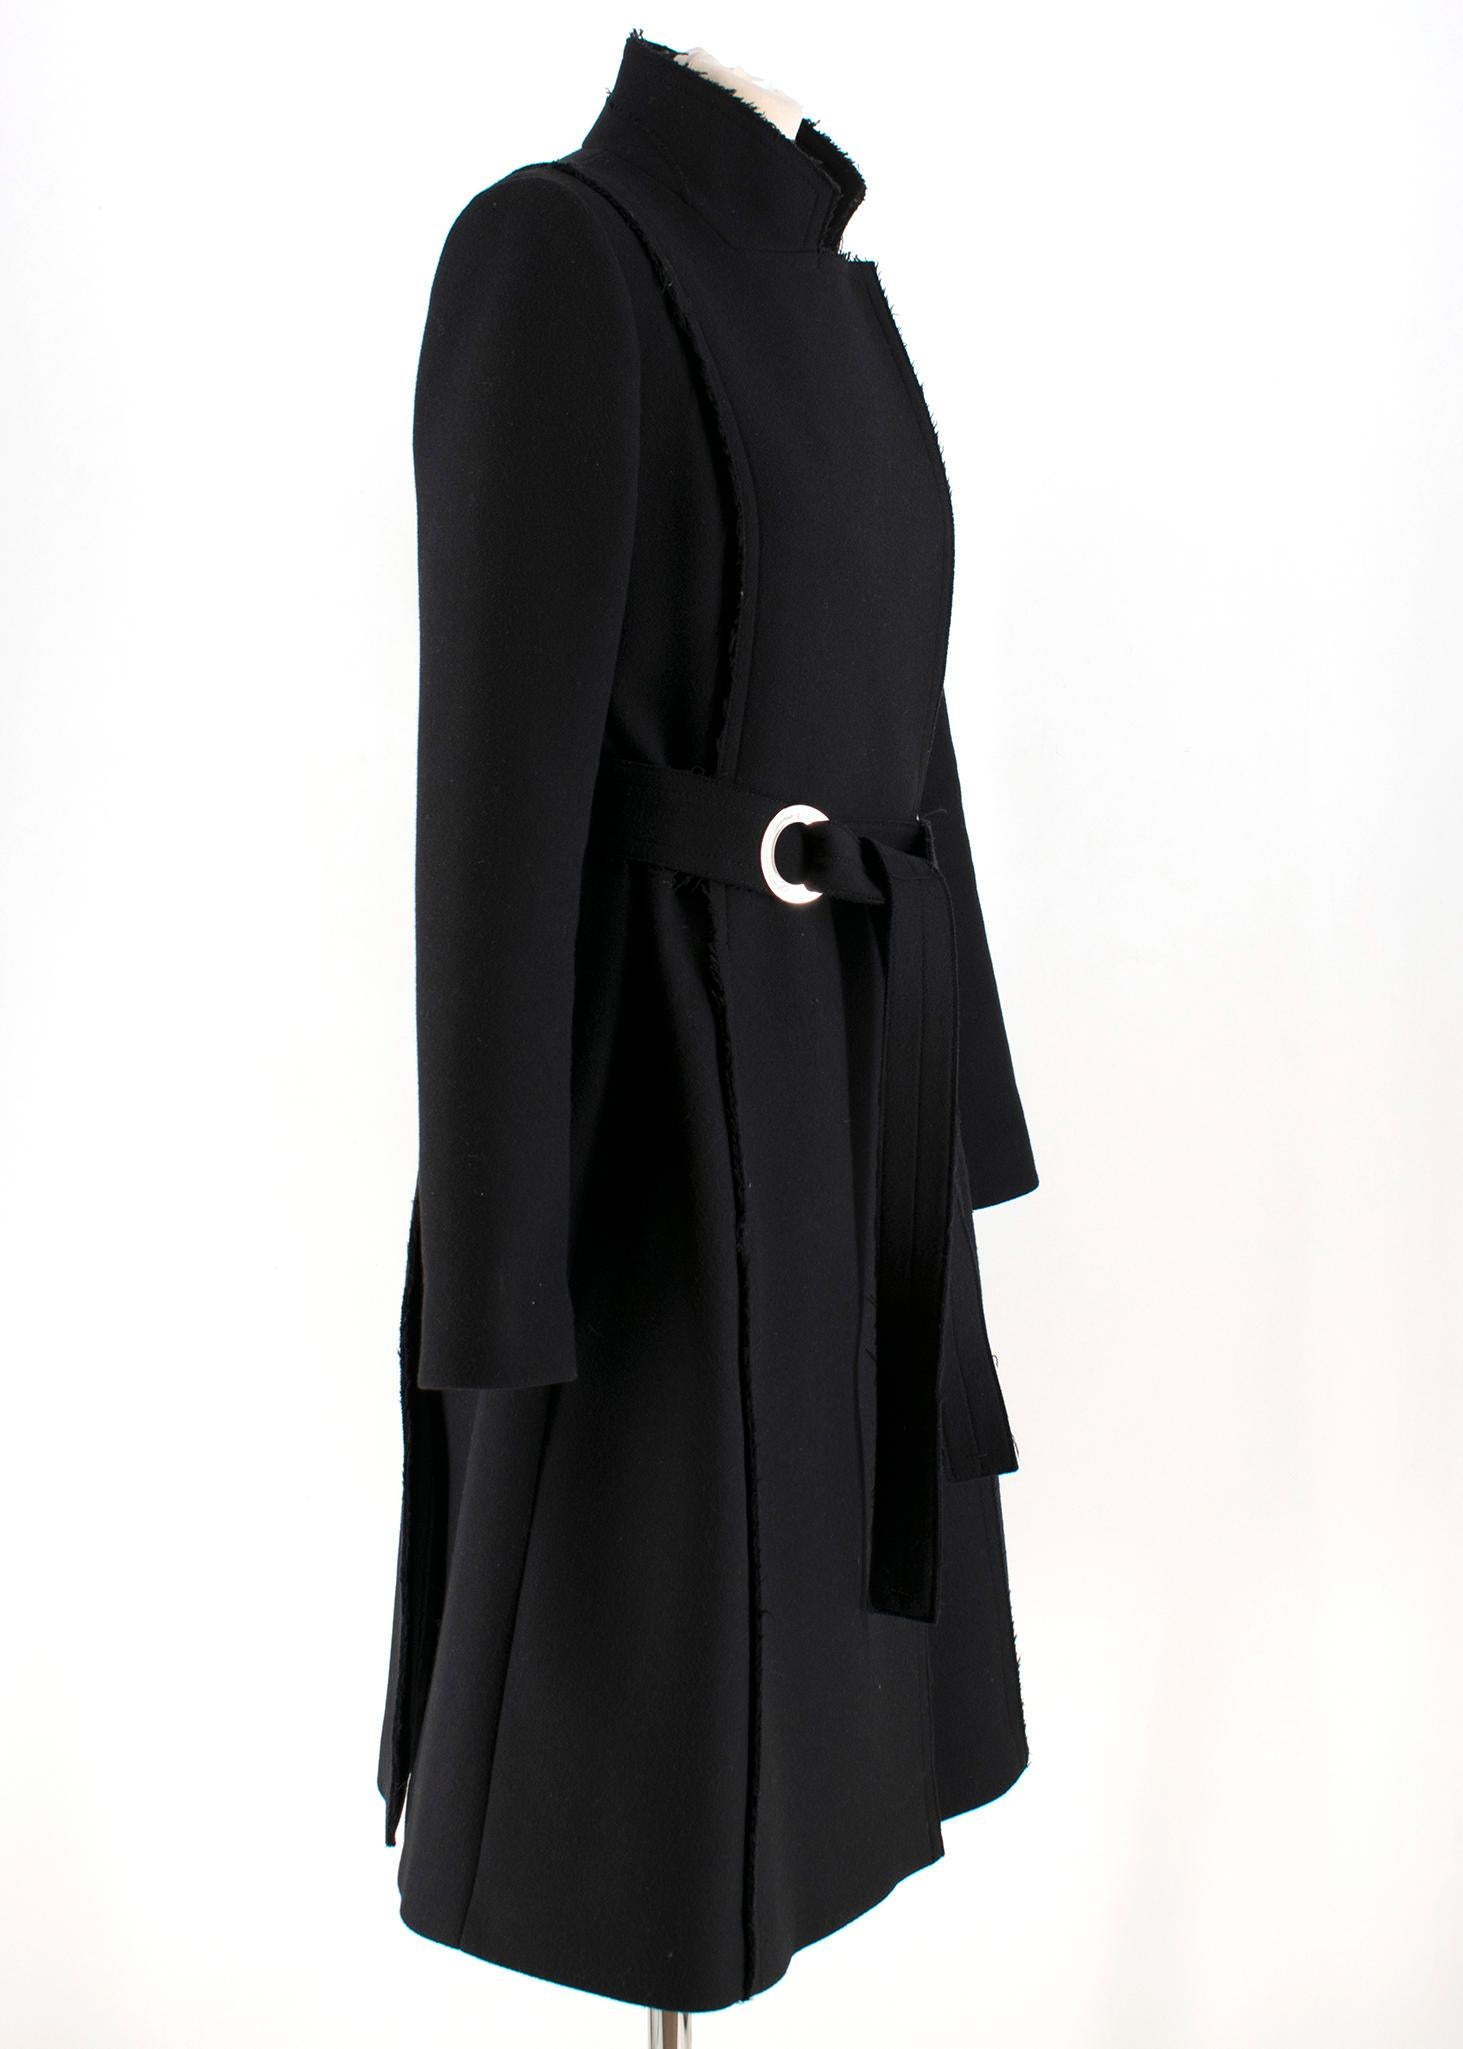 Proenza Schouler Belted Wool Blend Coat

- Black Long Sleeve Wool Coat 
- Swing style coat with vertical panels 
- stand or lapel collar 
- Sewn-in belt with silver tones circle detail 
- Discreet snap fastenings 
- Exposed raw seams

Please note,